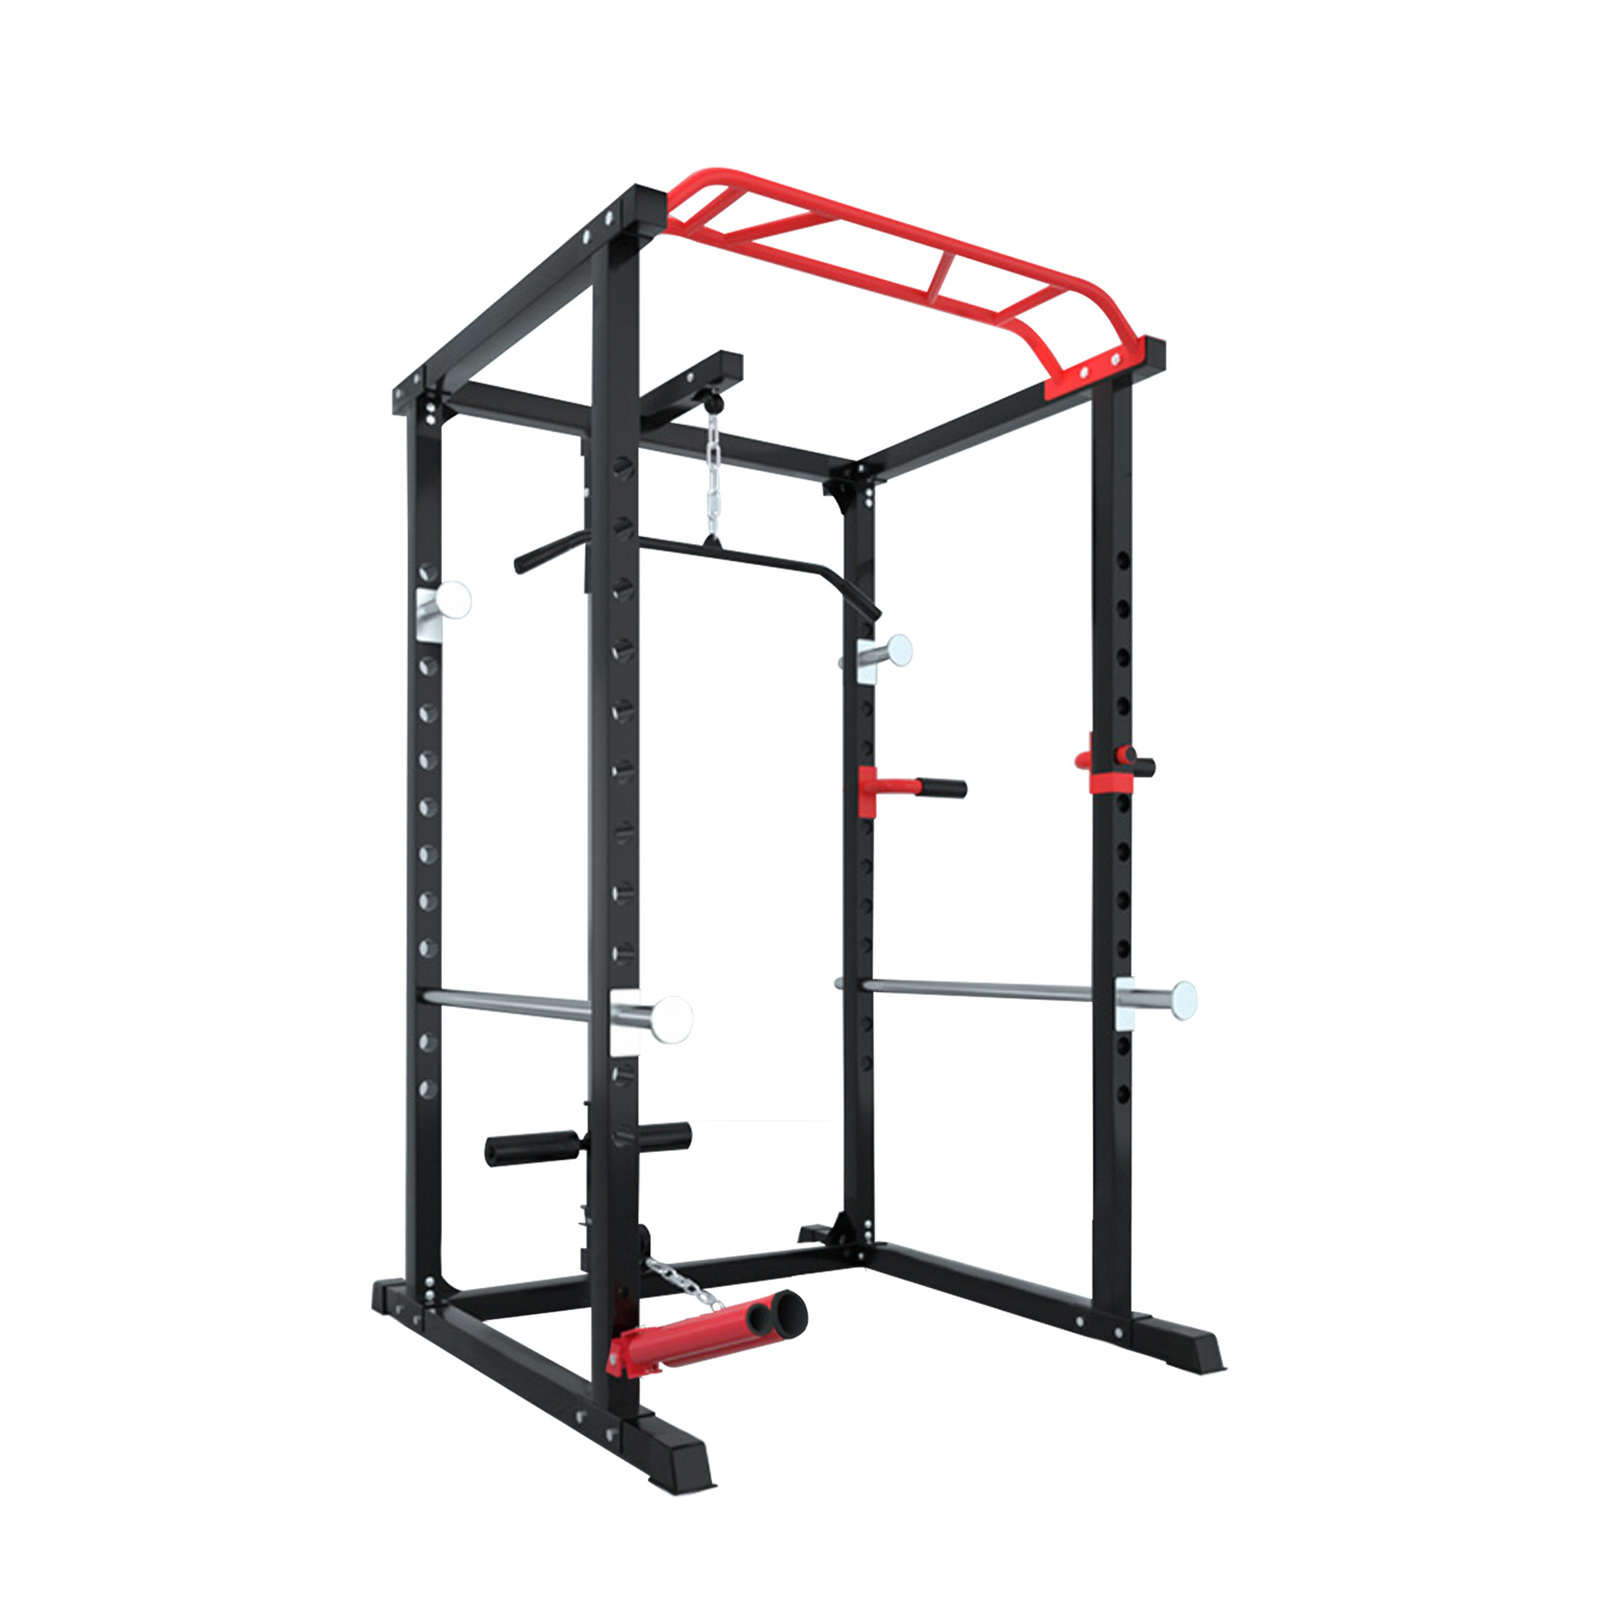 Power Rack Cage Multi-Function Adjustable Tower Gym Workout System 200kg Capacity 